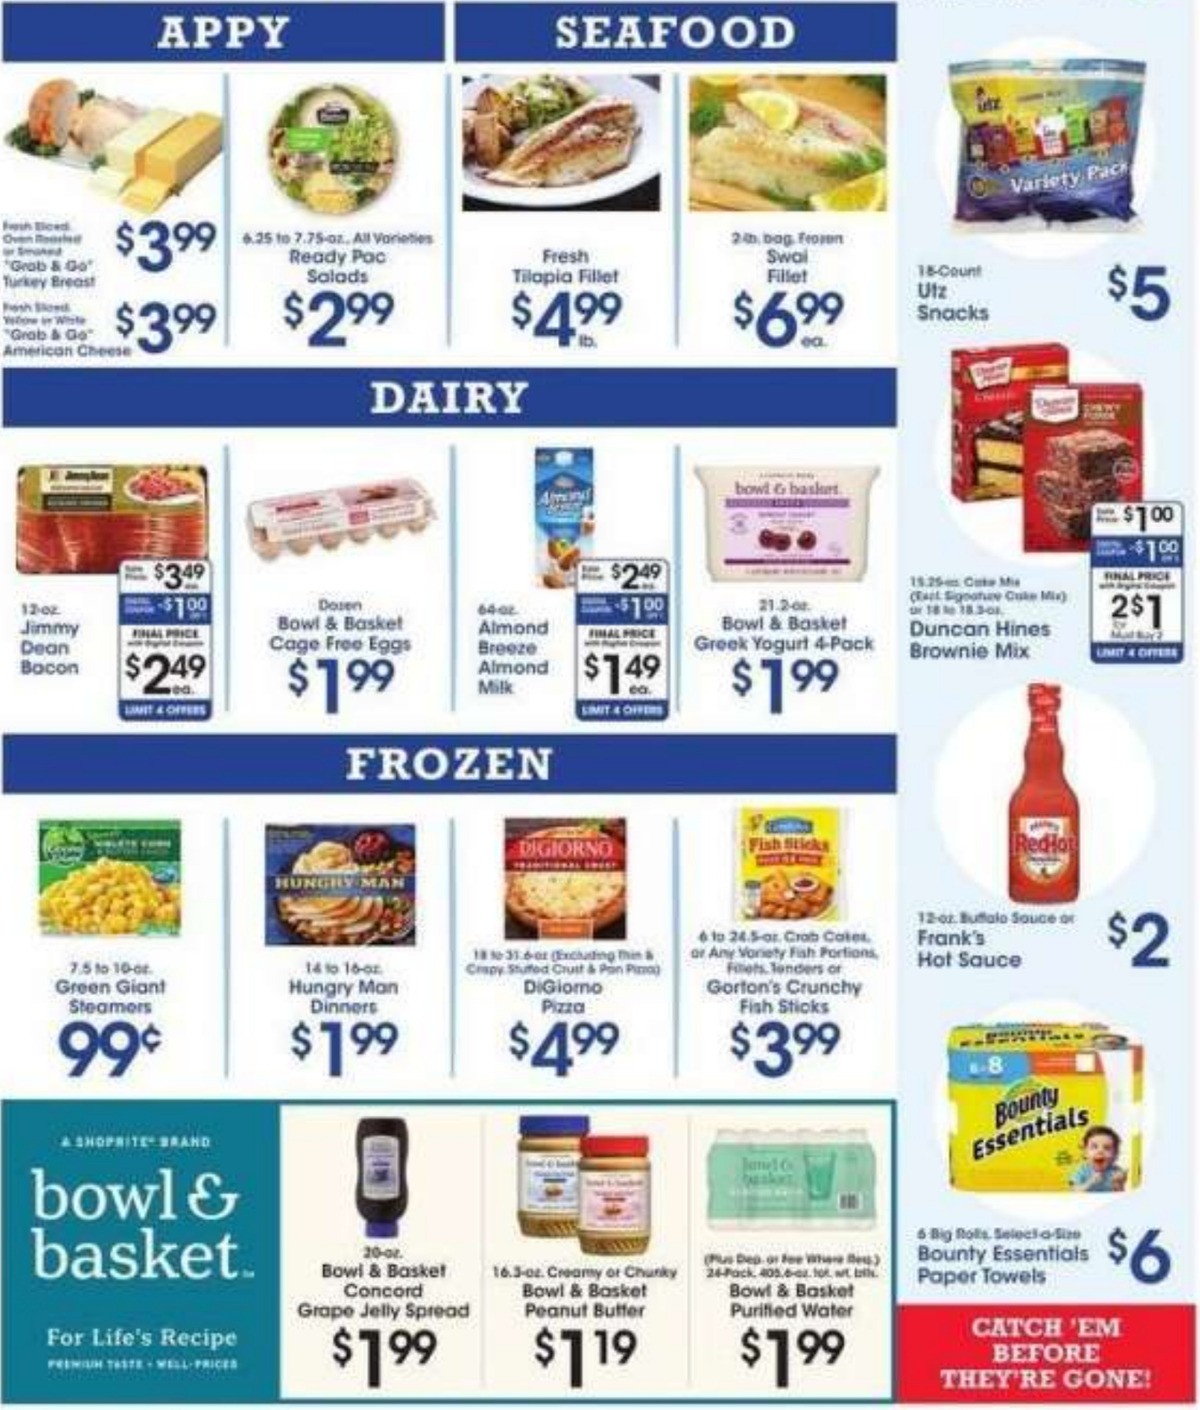 Price Rite Weekly Ad from March 19